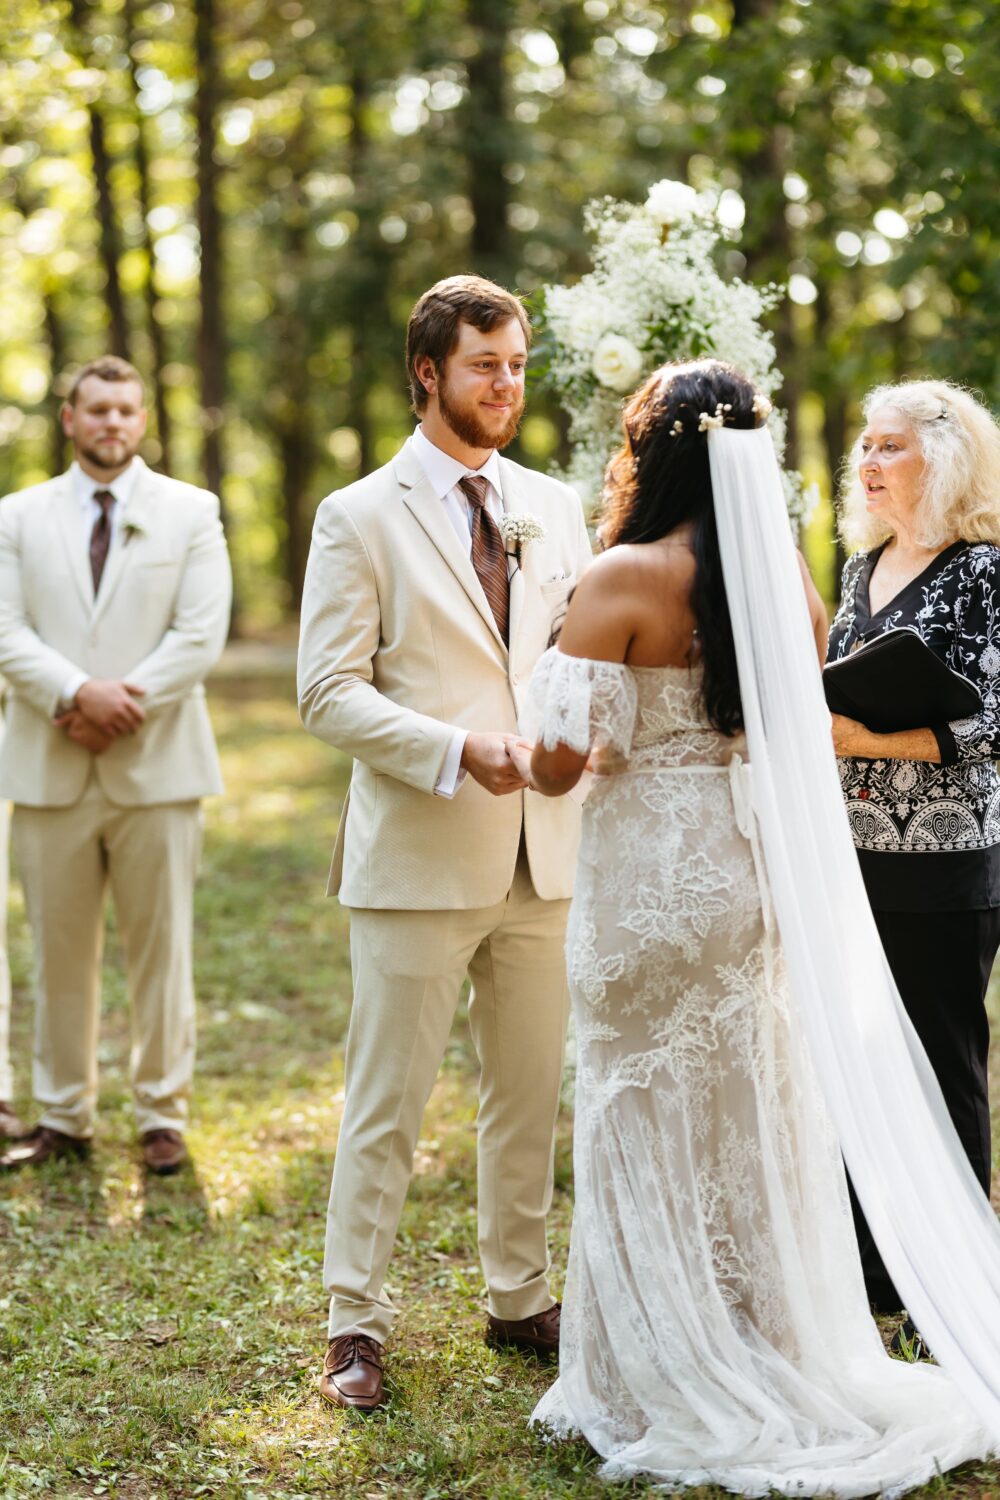 A groom smiles during his ceremony at Cedars of Lebanon in Tennessee.